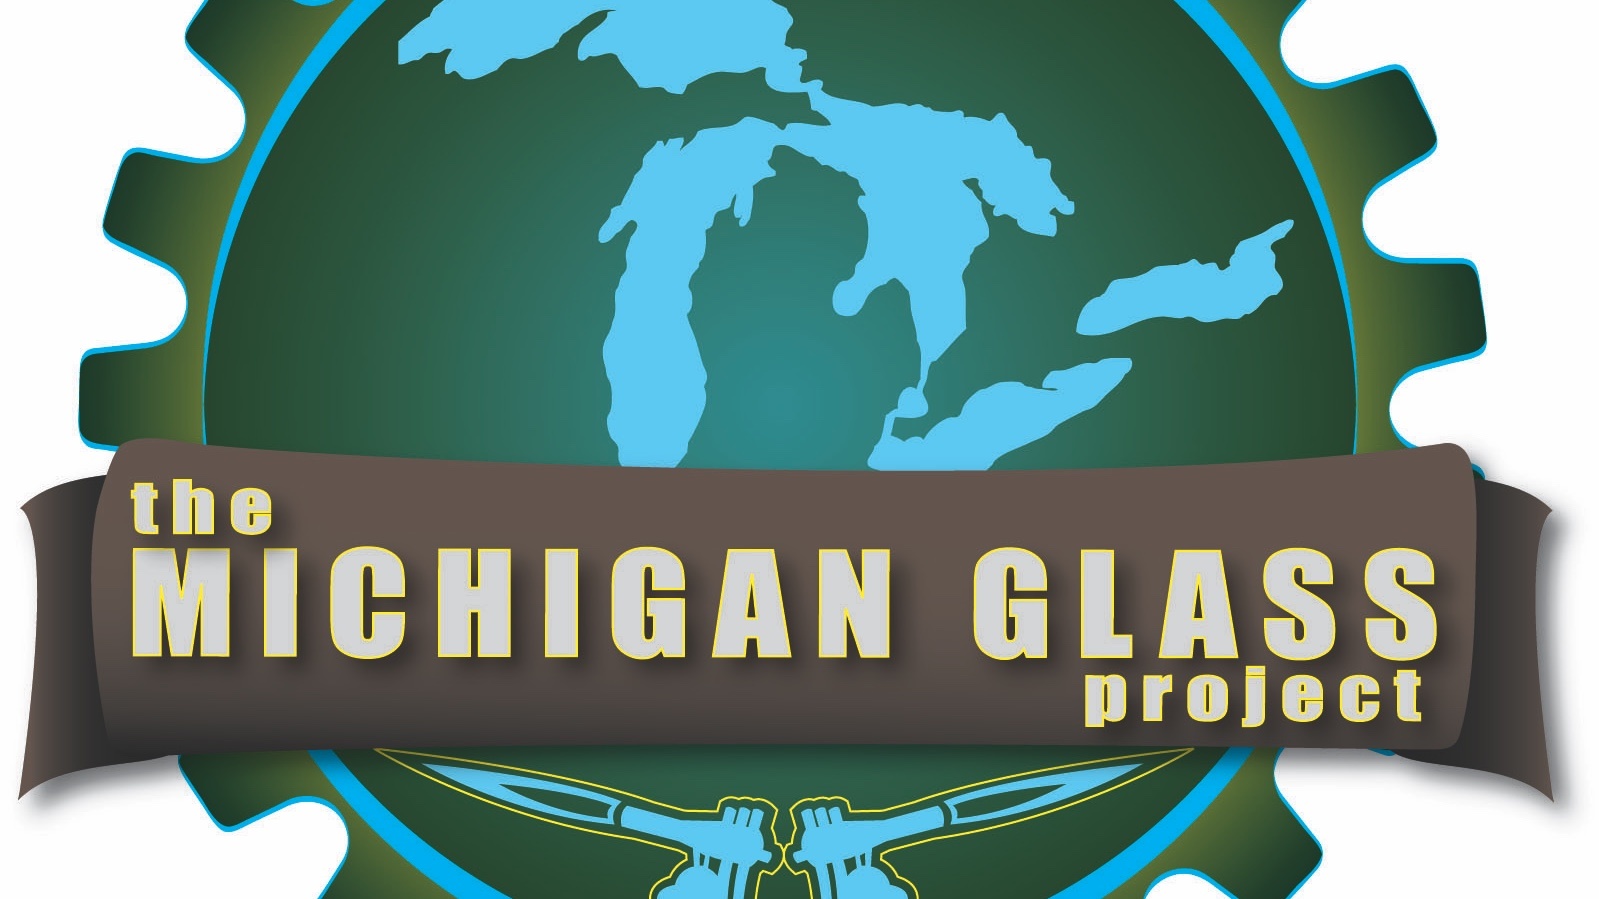 The Michigan Glass Project SponsorMyEvent